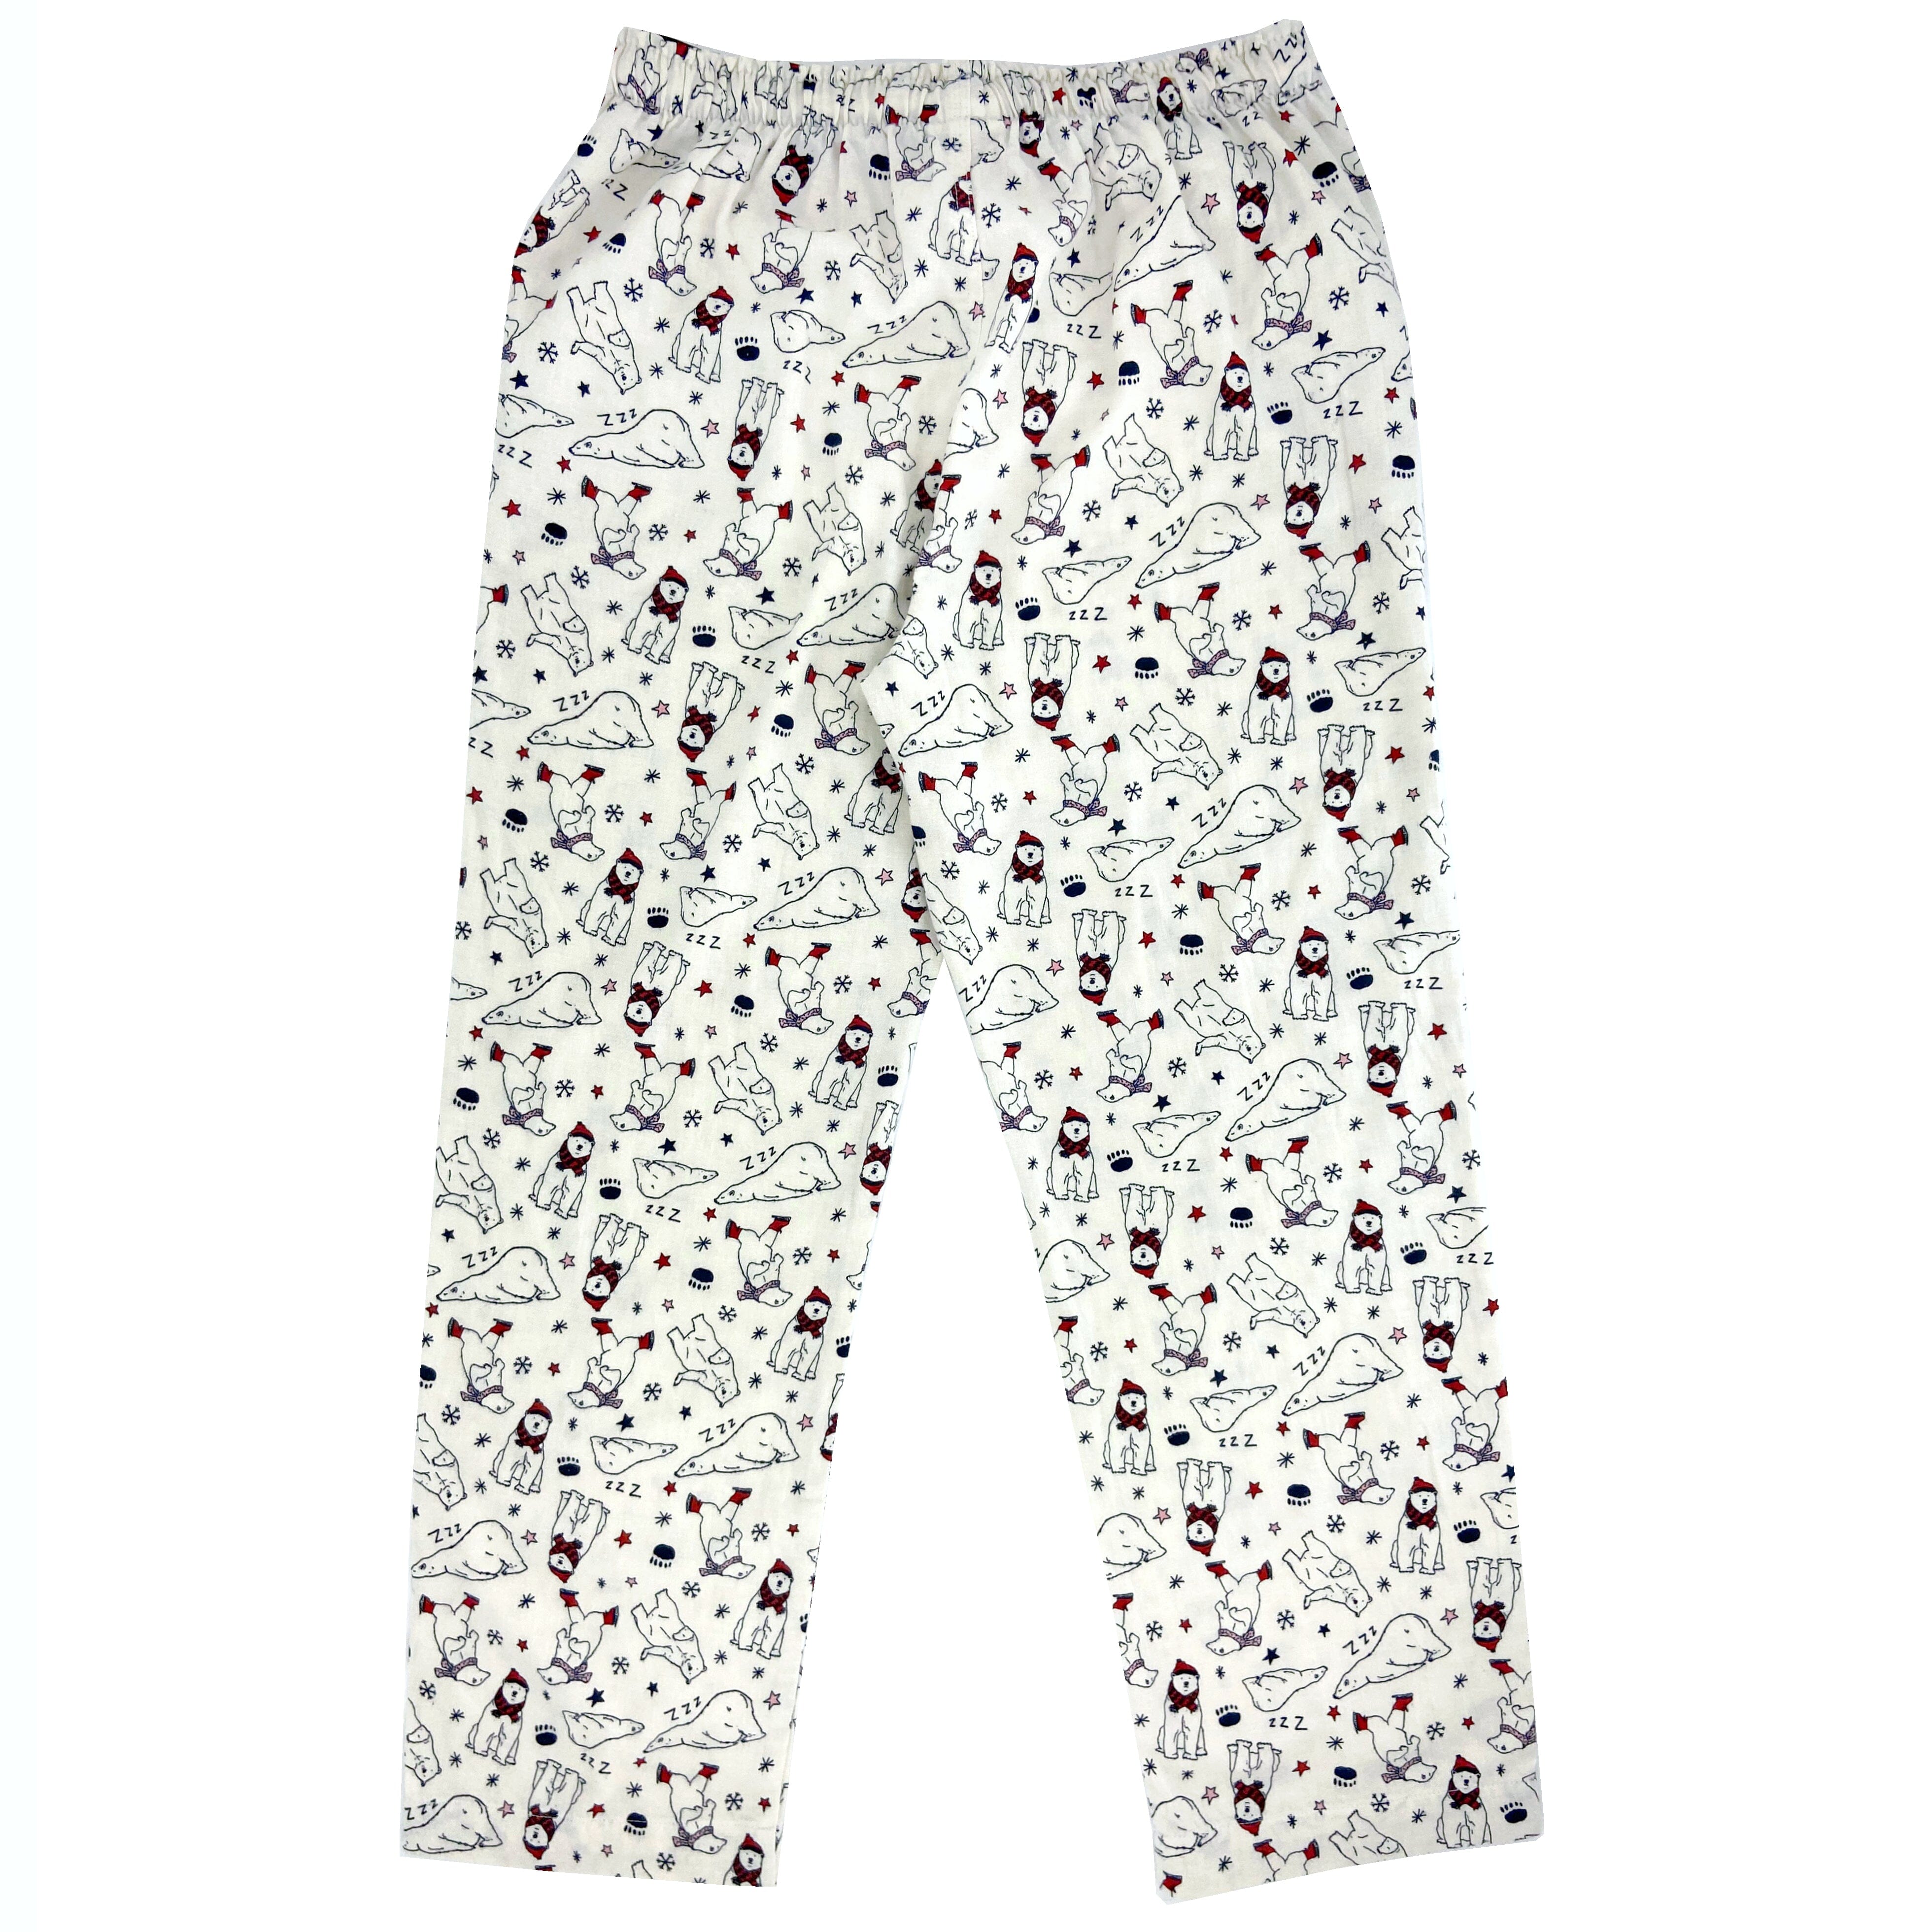 Winter Essentials. Buy Warm Flannel Pajama Pants For Men Here. Polar Bear Patterned Bottoms